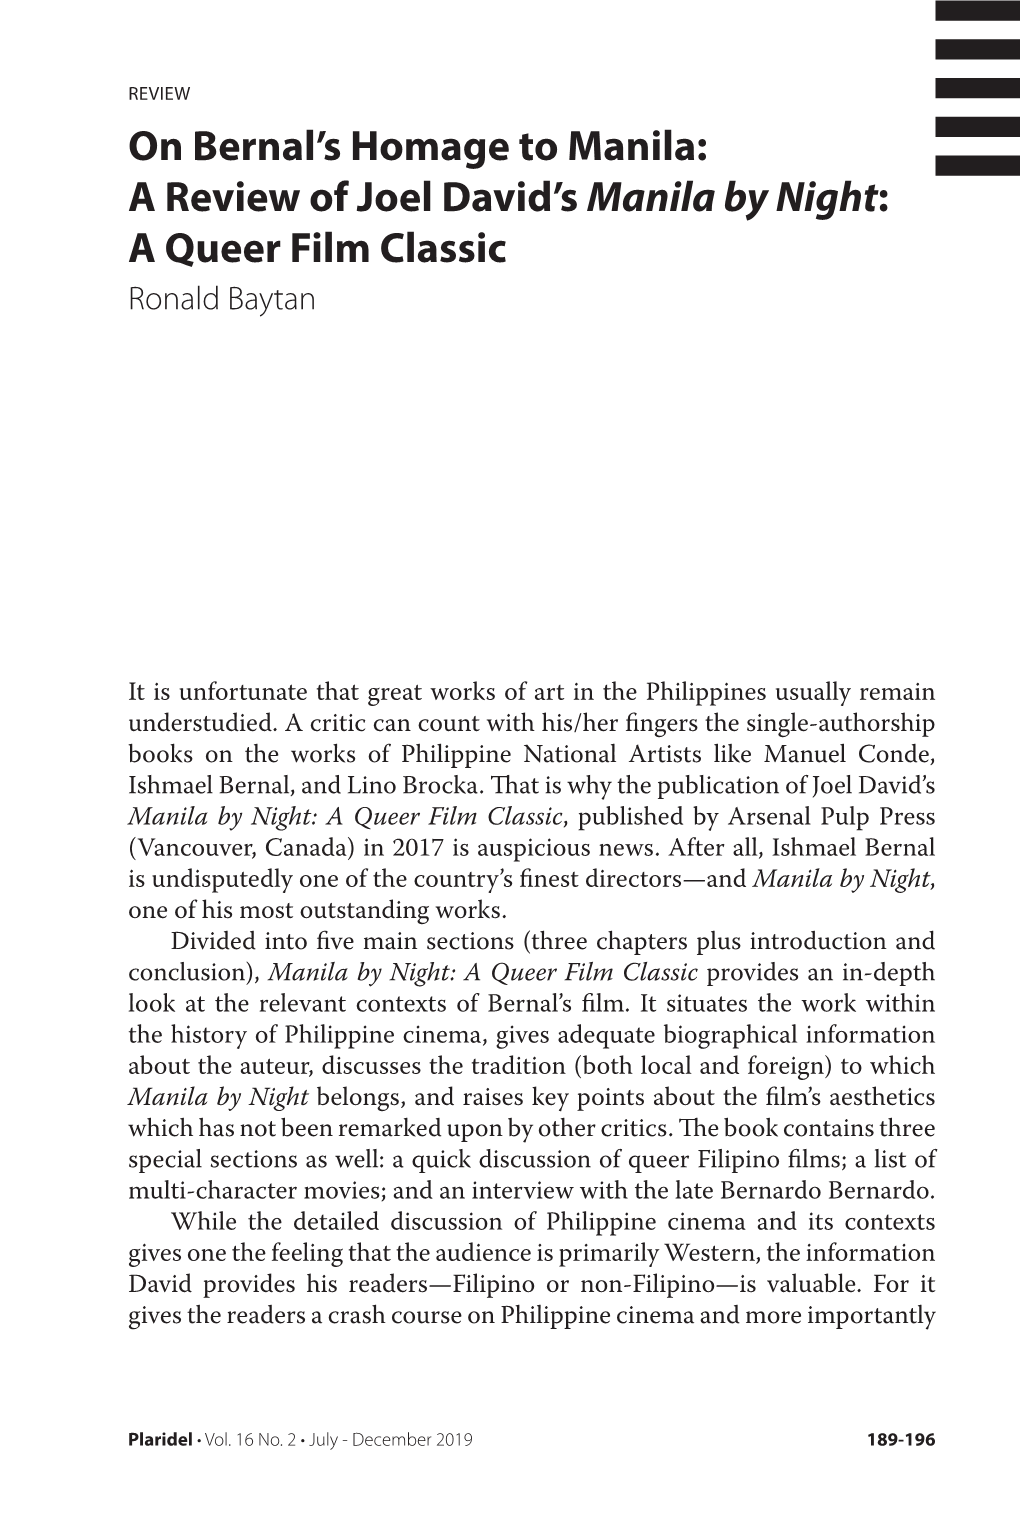 On Bernal's Homage to Manila: a Review of Joel David's Manila By